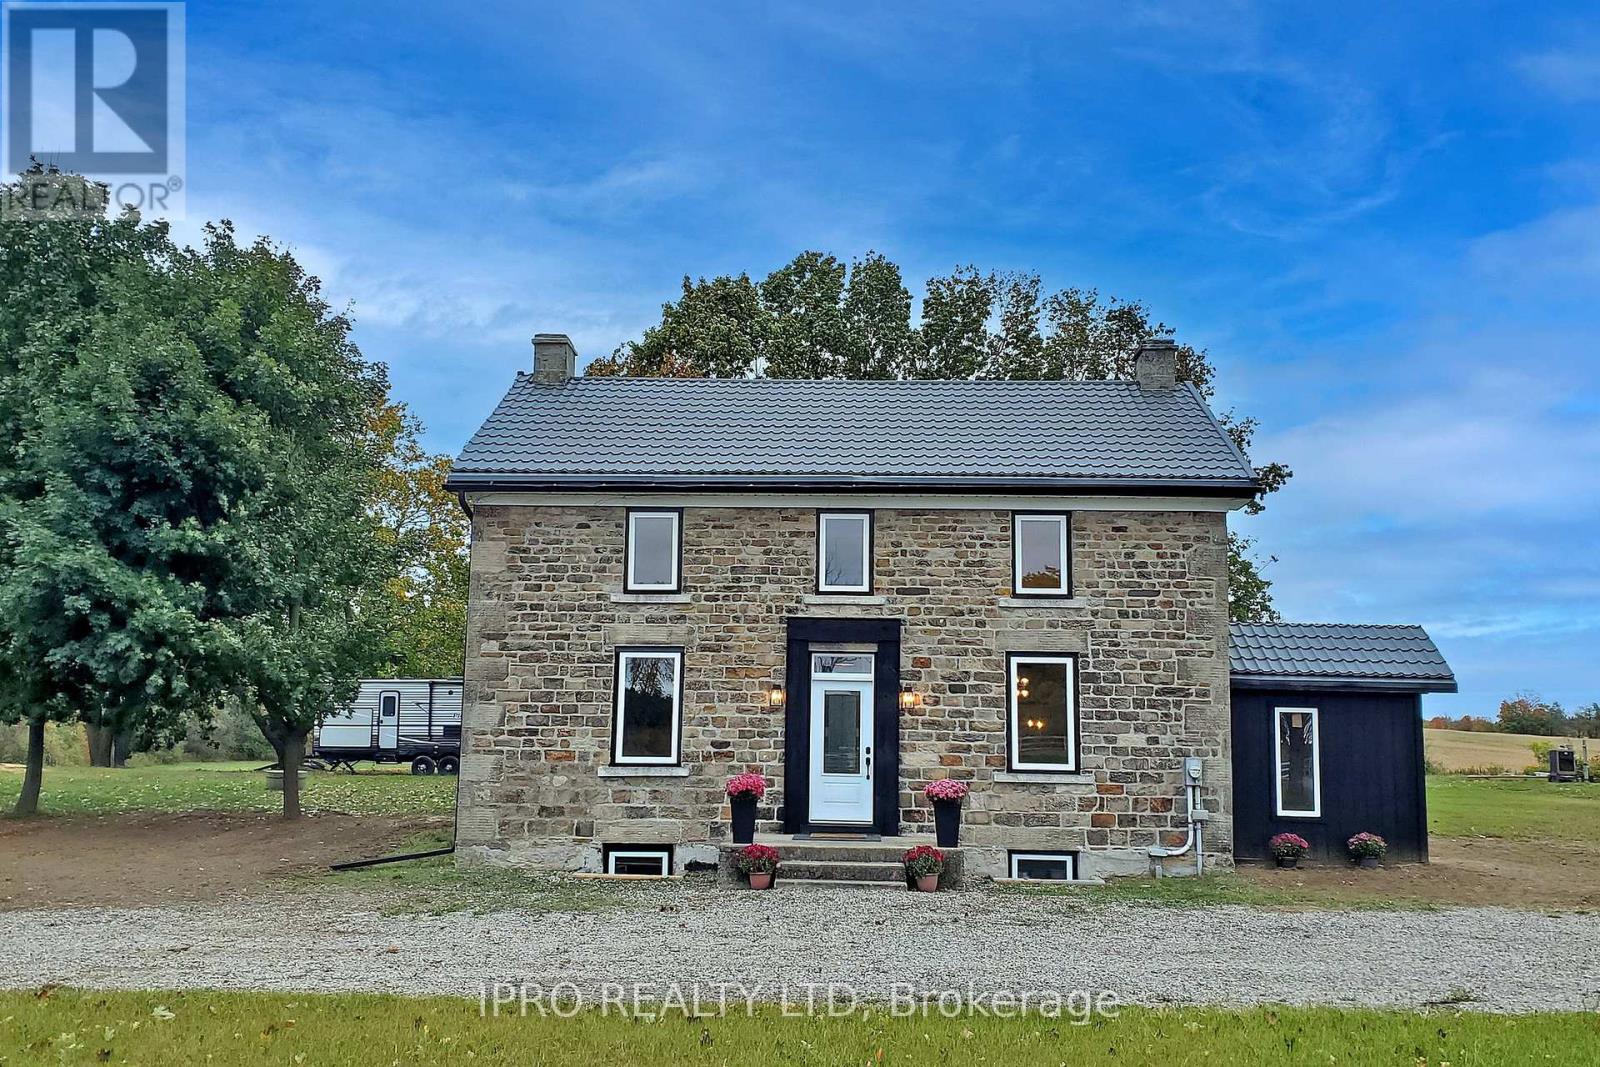 18161 HEART LAKE RD located in Caledon, Ontario